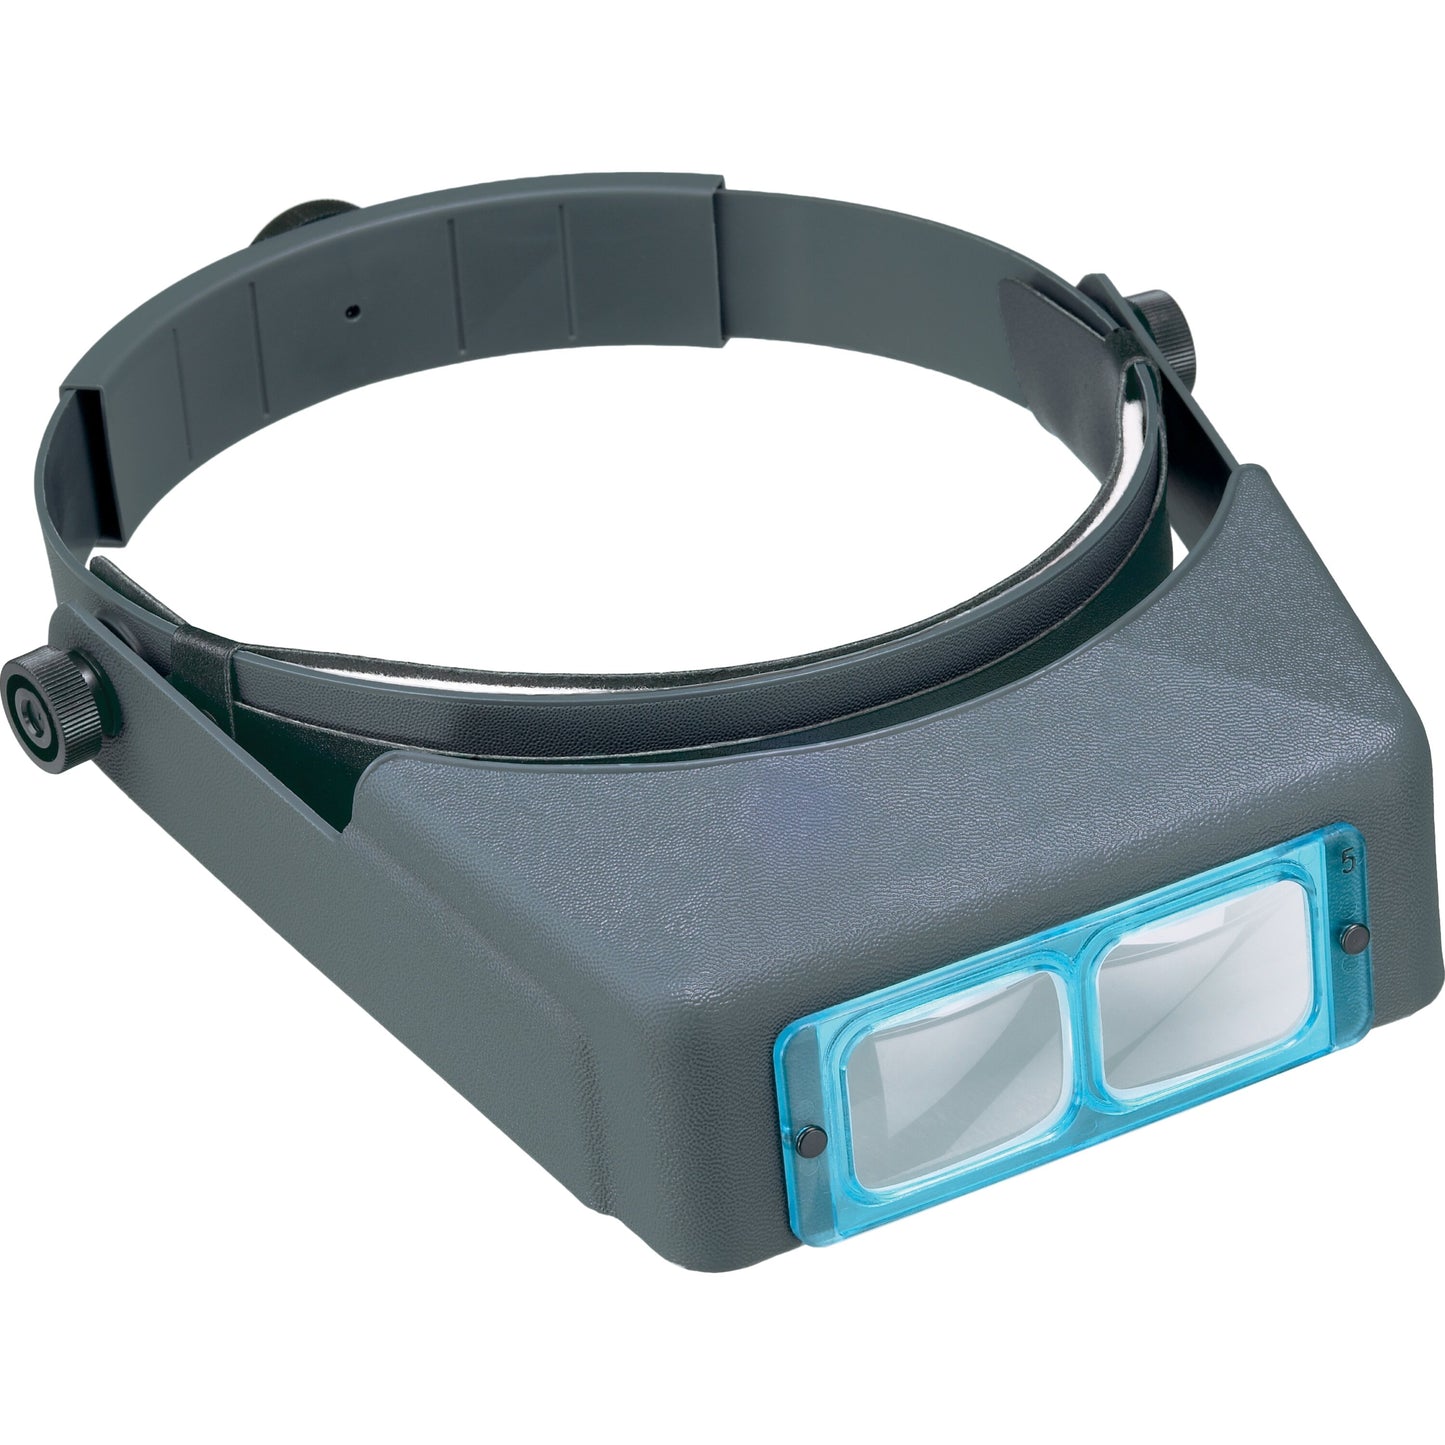 Donegan Optical 1.75X OptiVisor Headset Magnifier for Jewelers Watchmaker